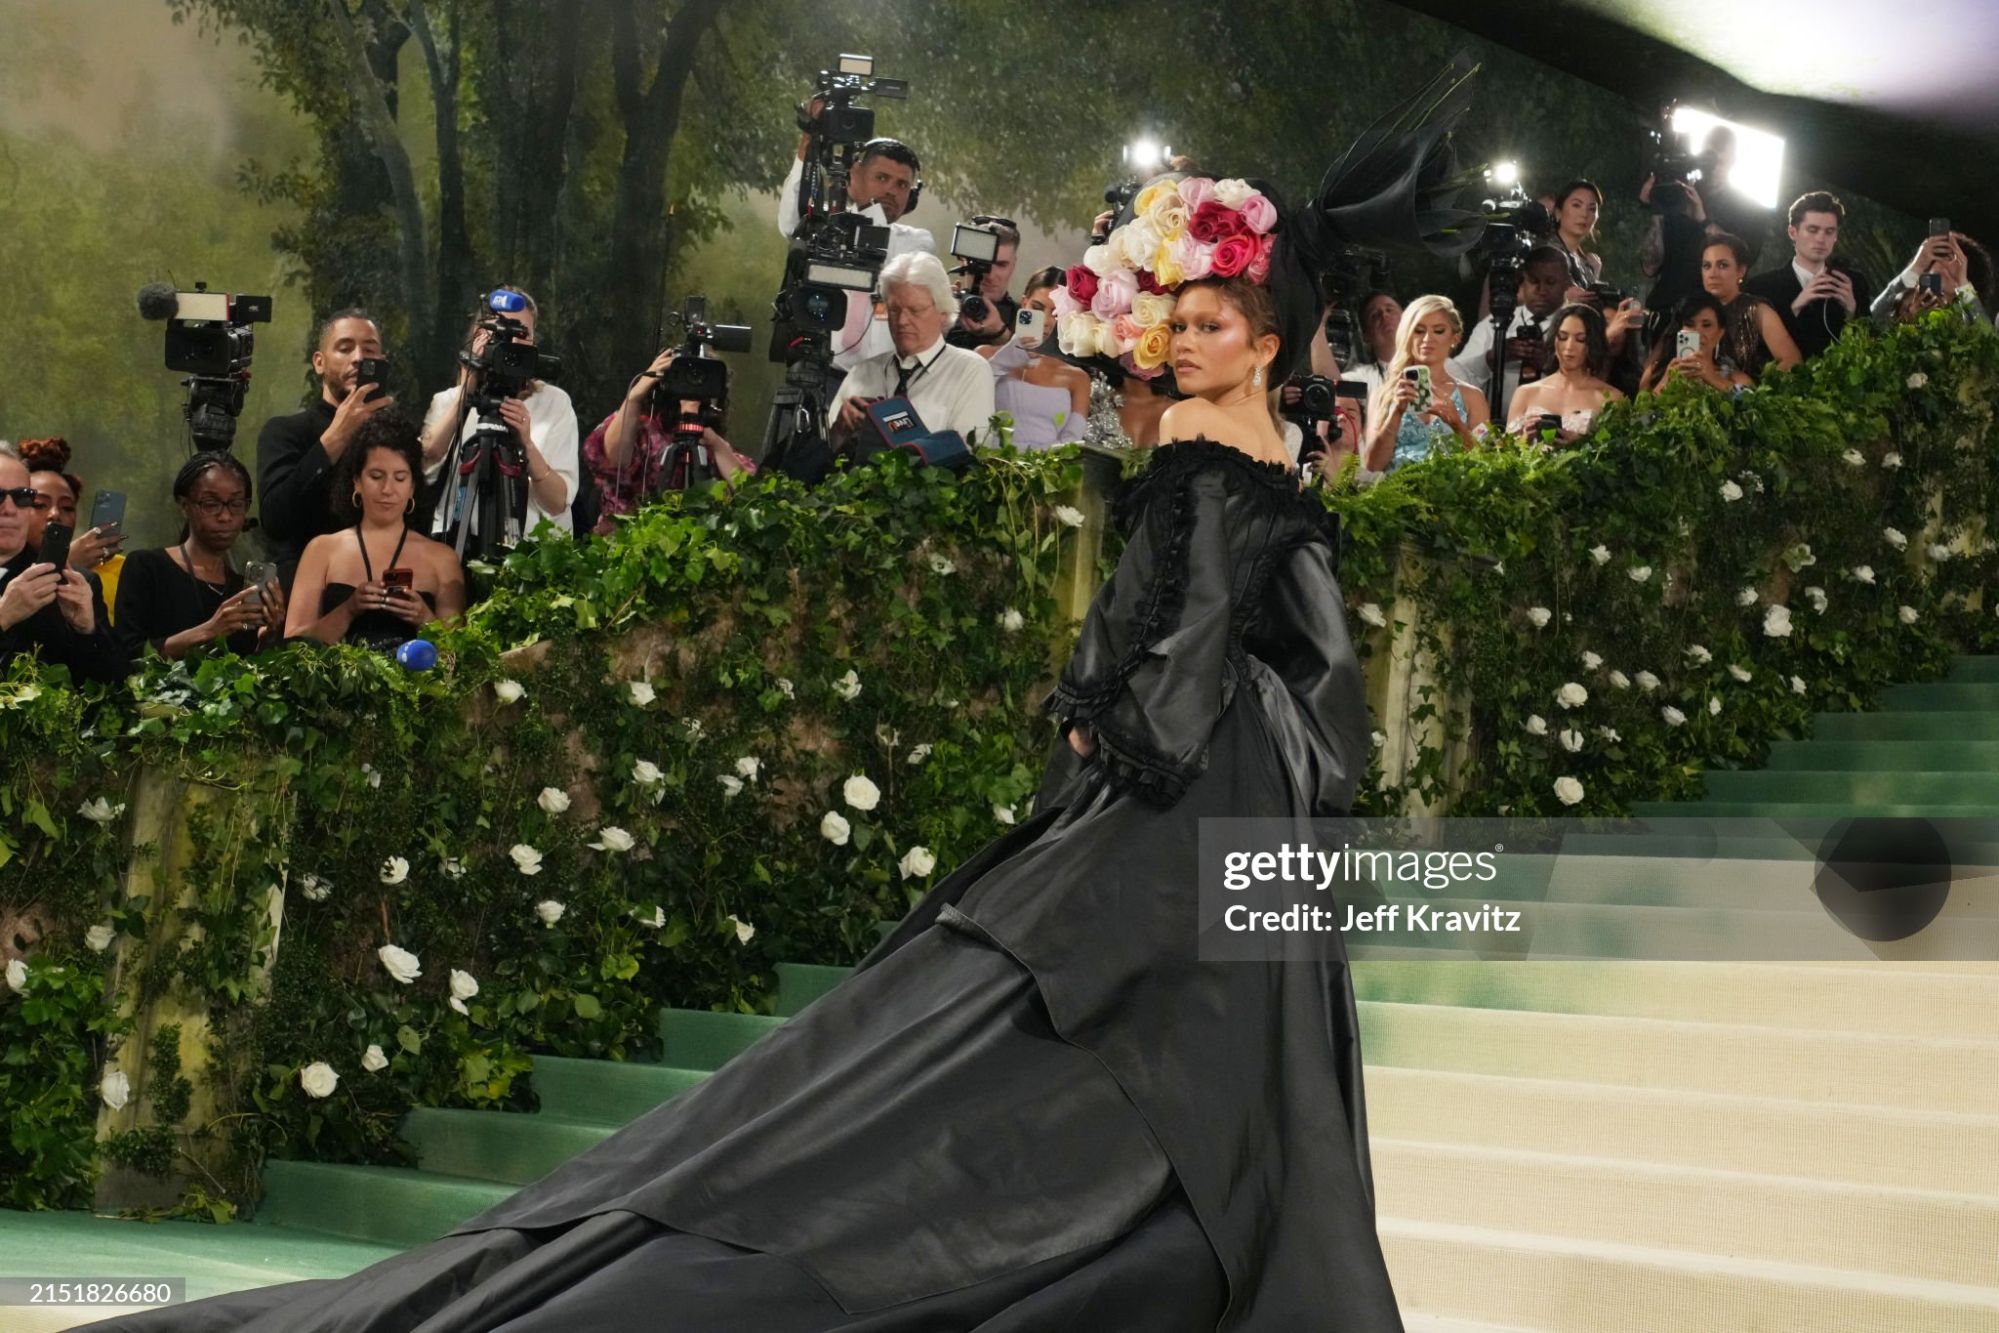 gettyimages-2151826680-2048x2048.jpg